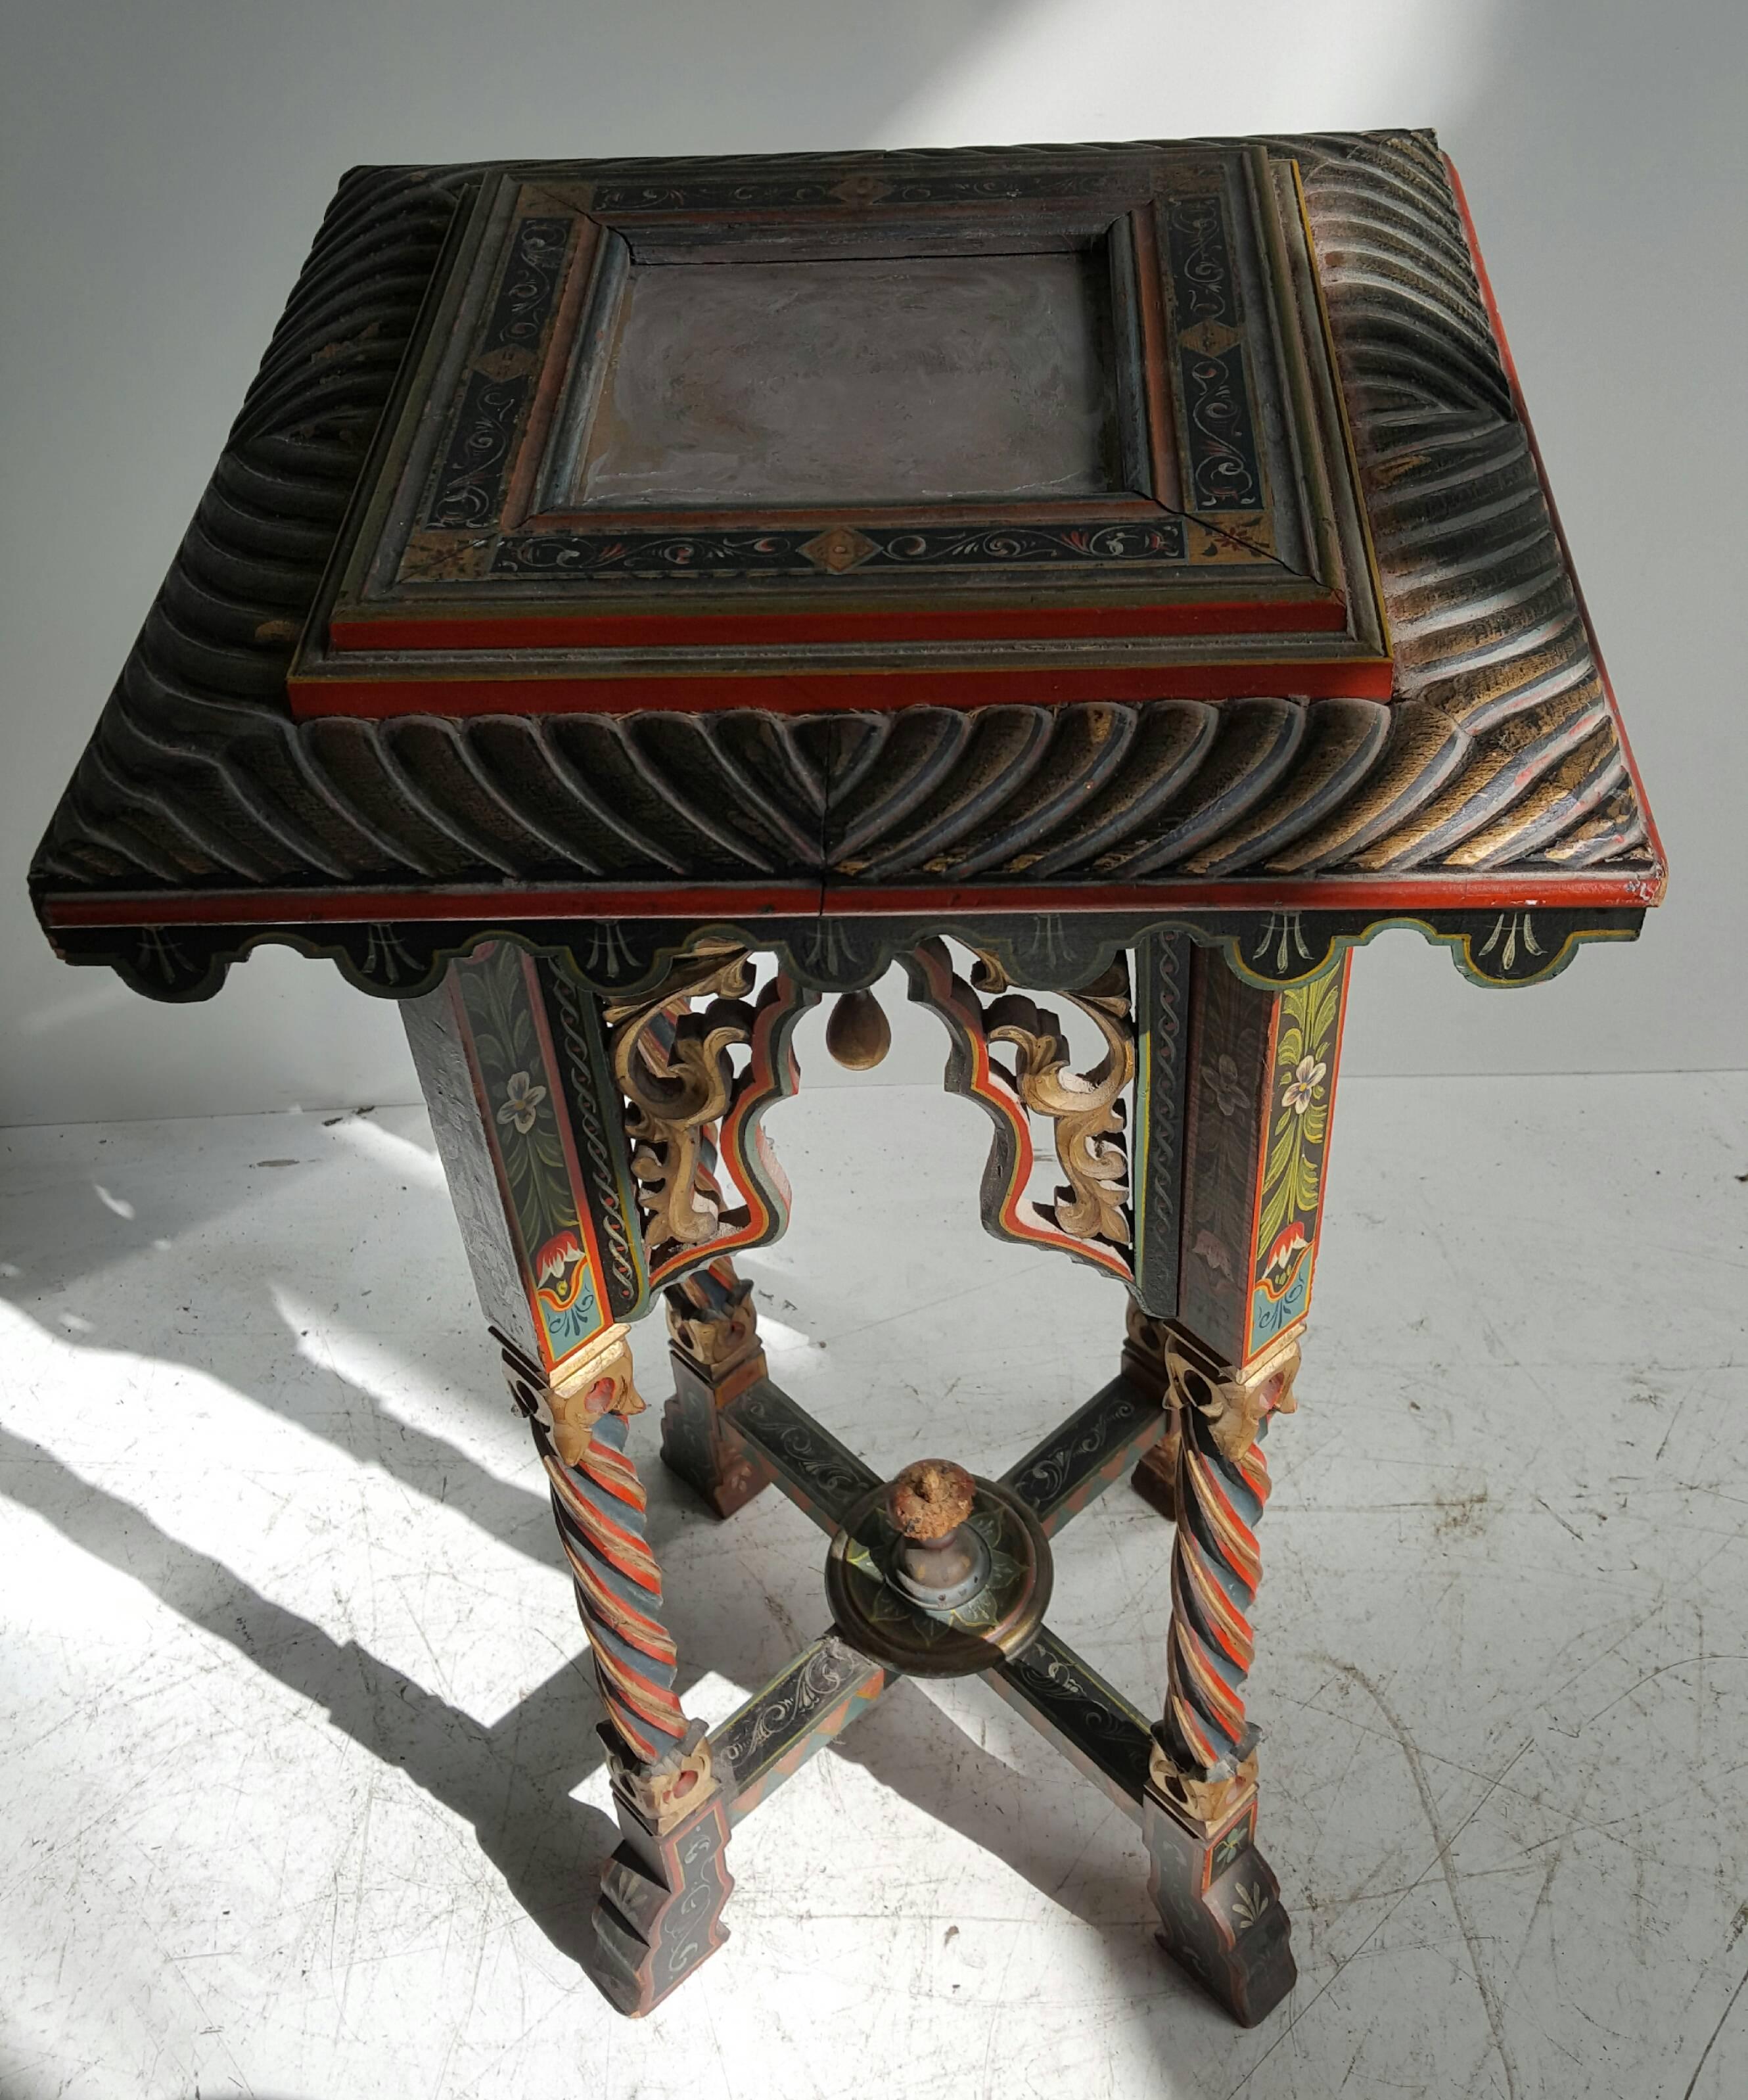 Unusual painted table or stand, Italian, Morrish manner of Bugatti, wonderful little accent piece, amazing detail, pedestal. Plant stand, occasional table, turn of the century. All hand-painted, great patina, surface, appears to have had a painted